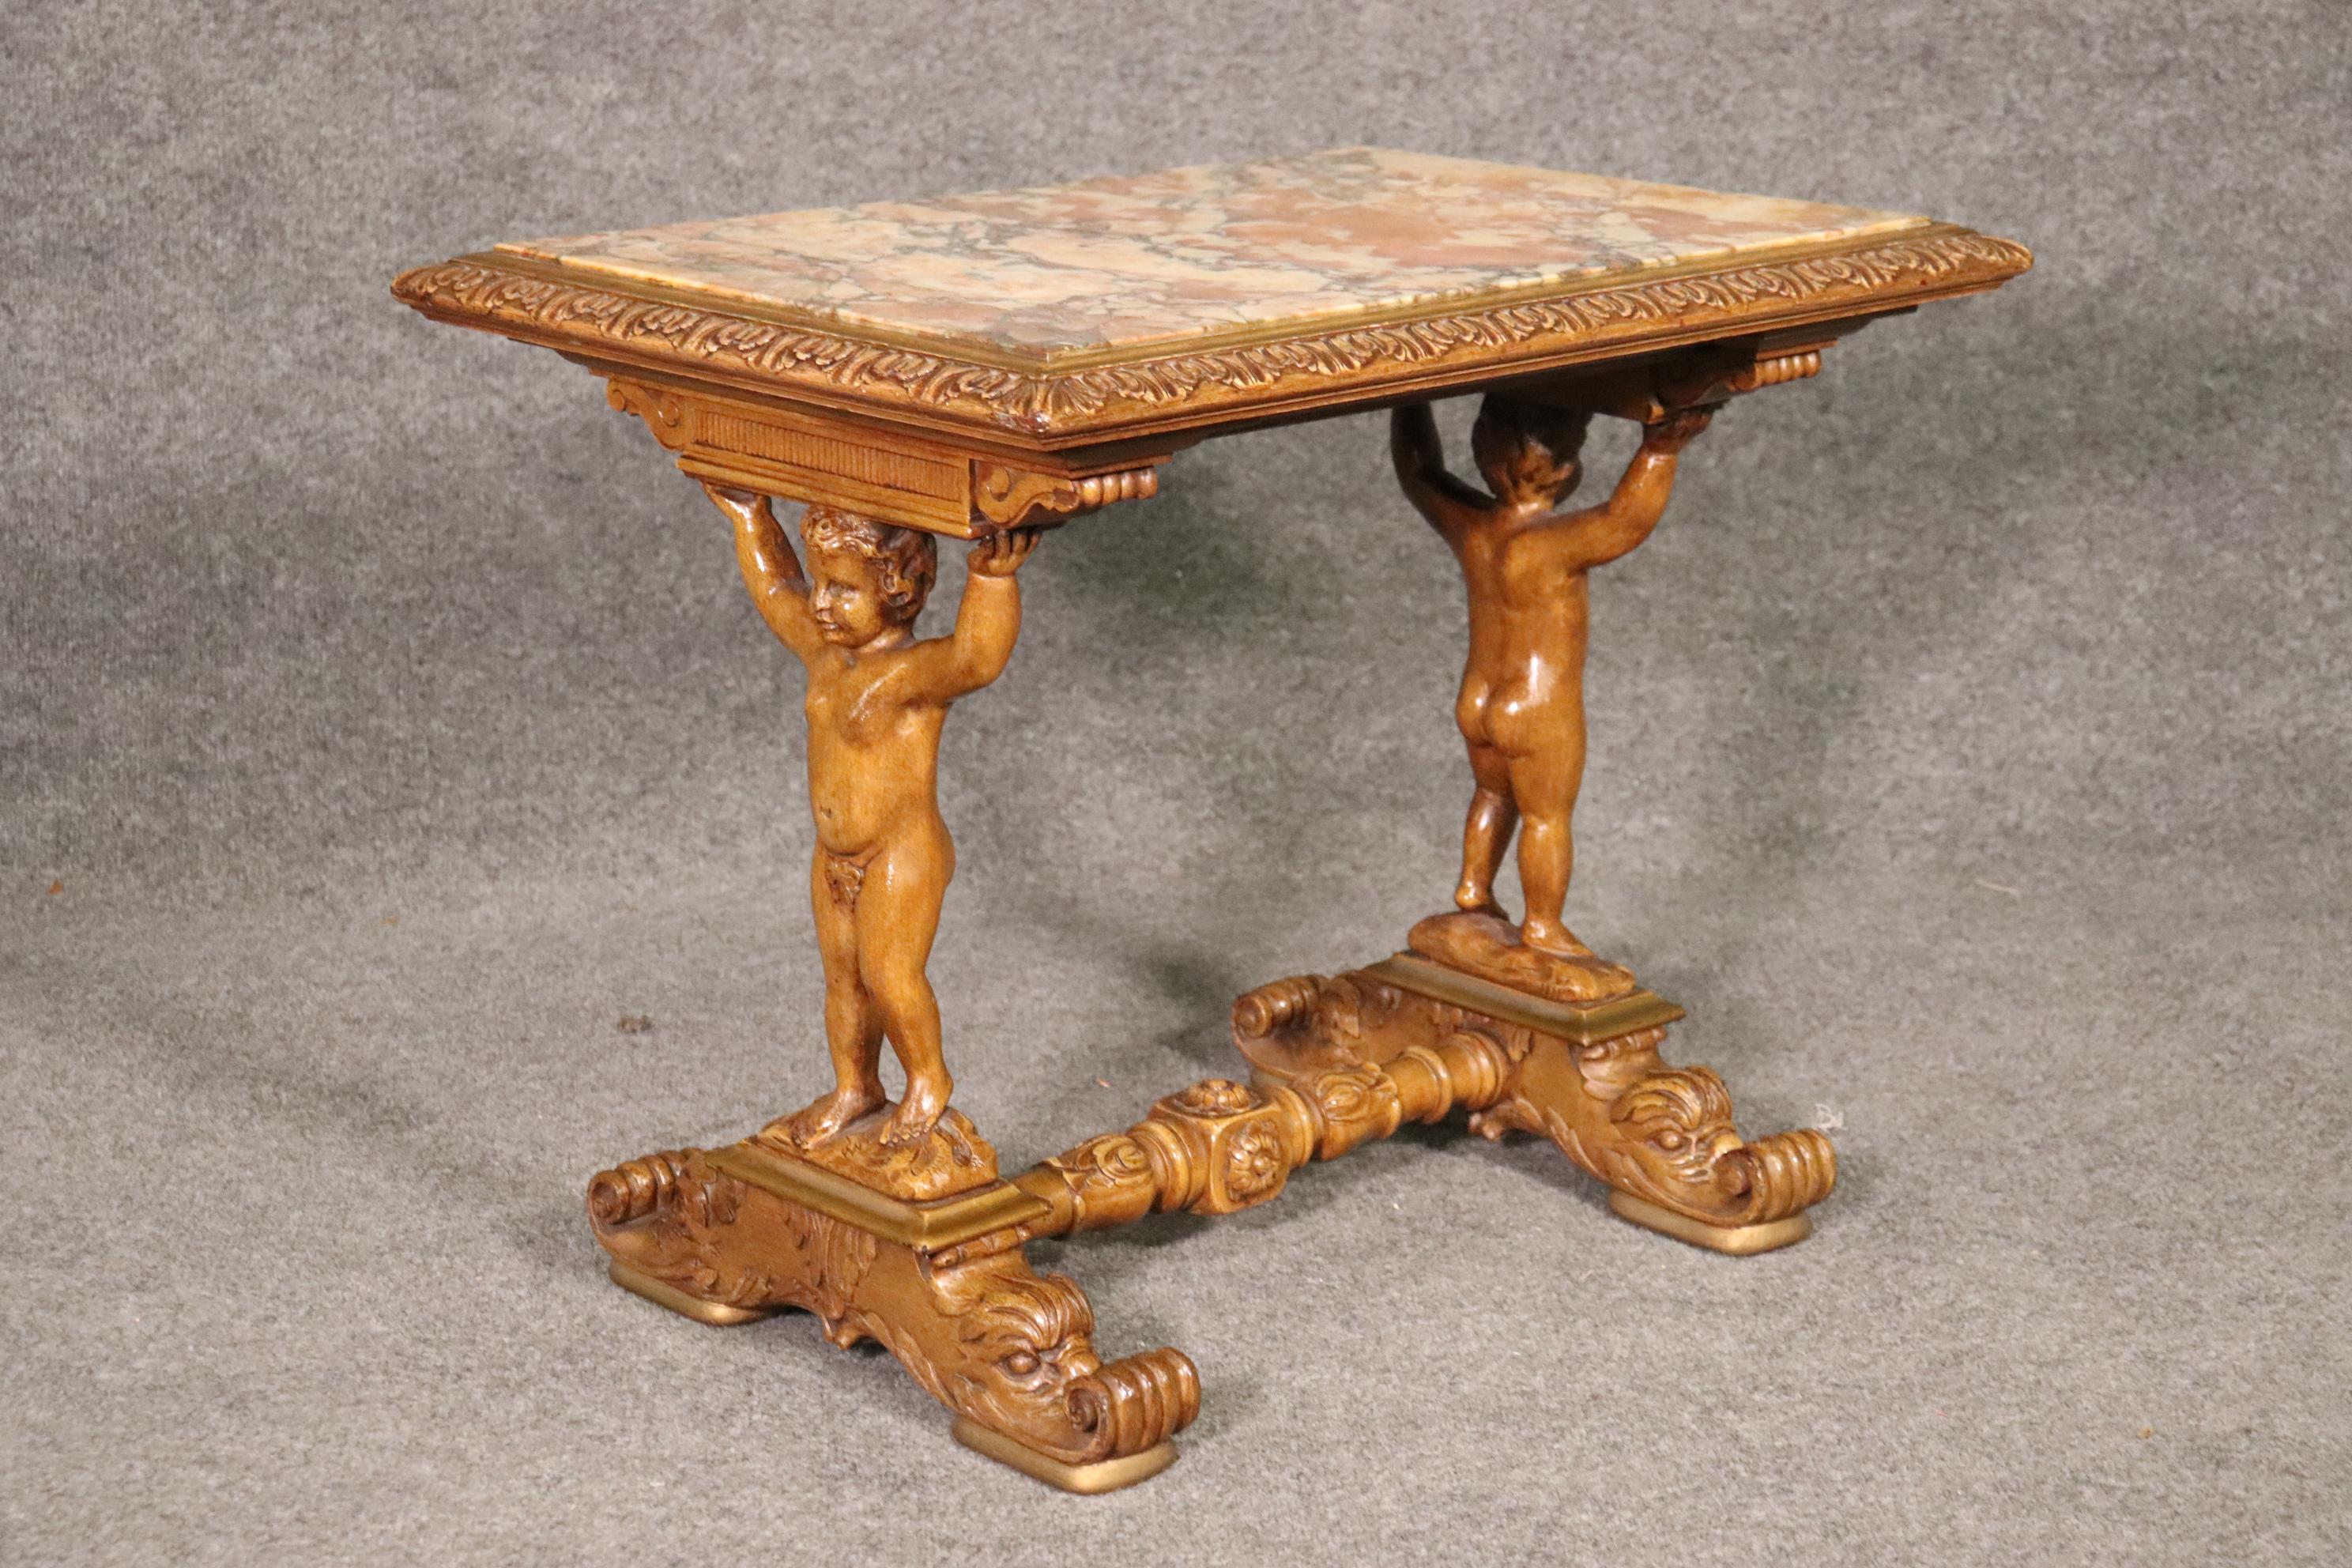 This is a gorgeous marbe top table made in Italy of incredible materialsand done incredibky well. Look the quality of the carving and condition. Measures 27 wide x 19 deep x 22 tall.